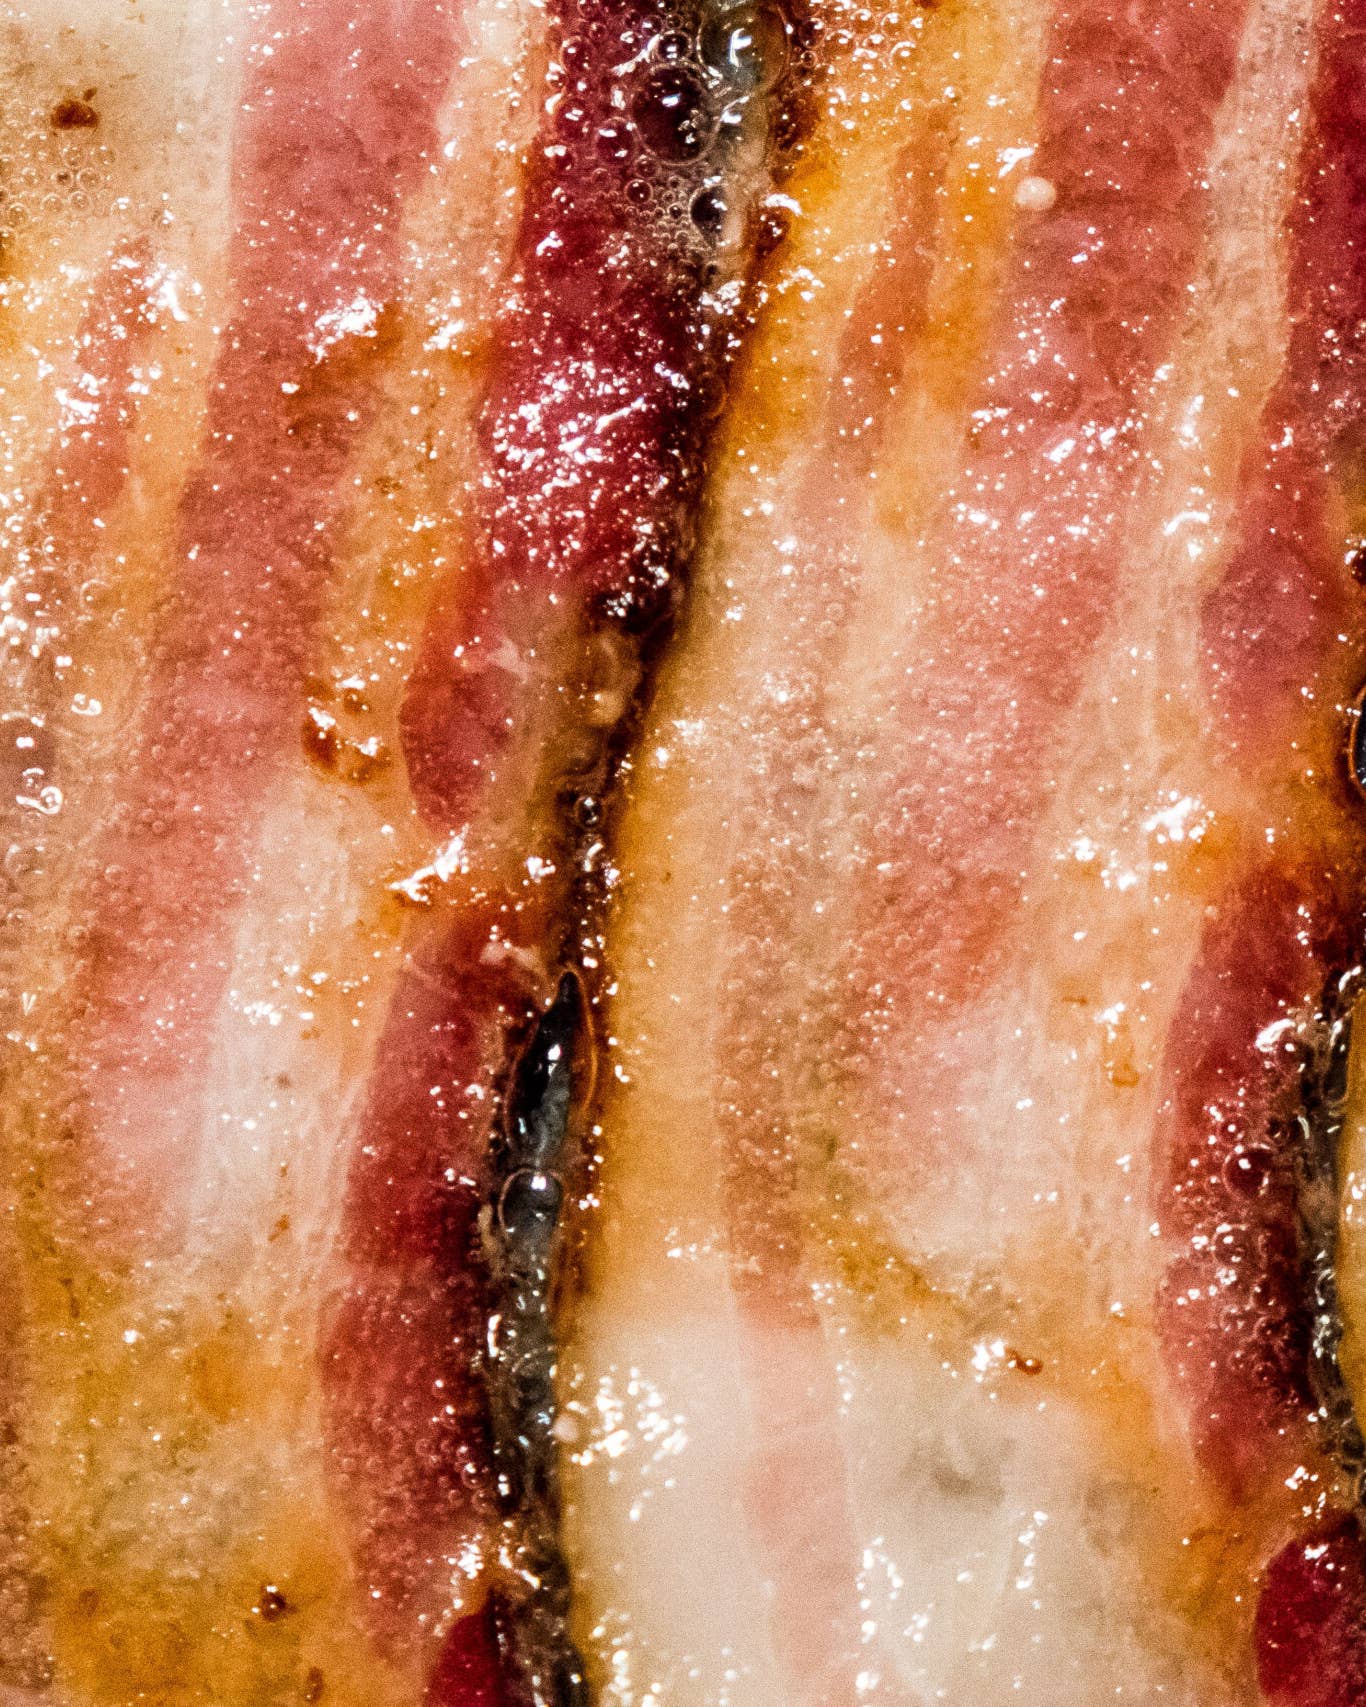 How to Make Oven-Fried Bacon